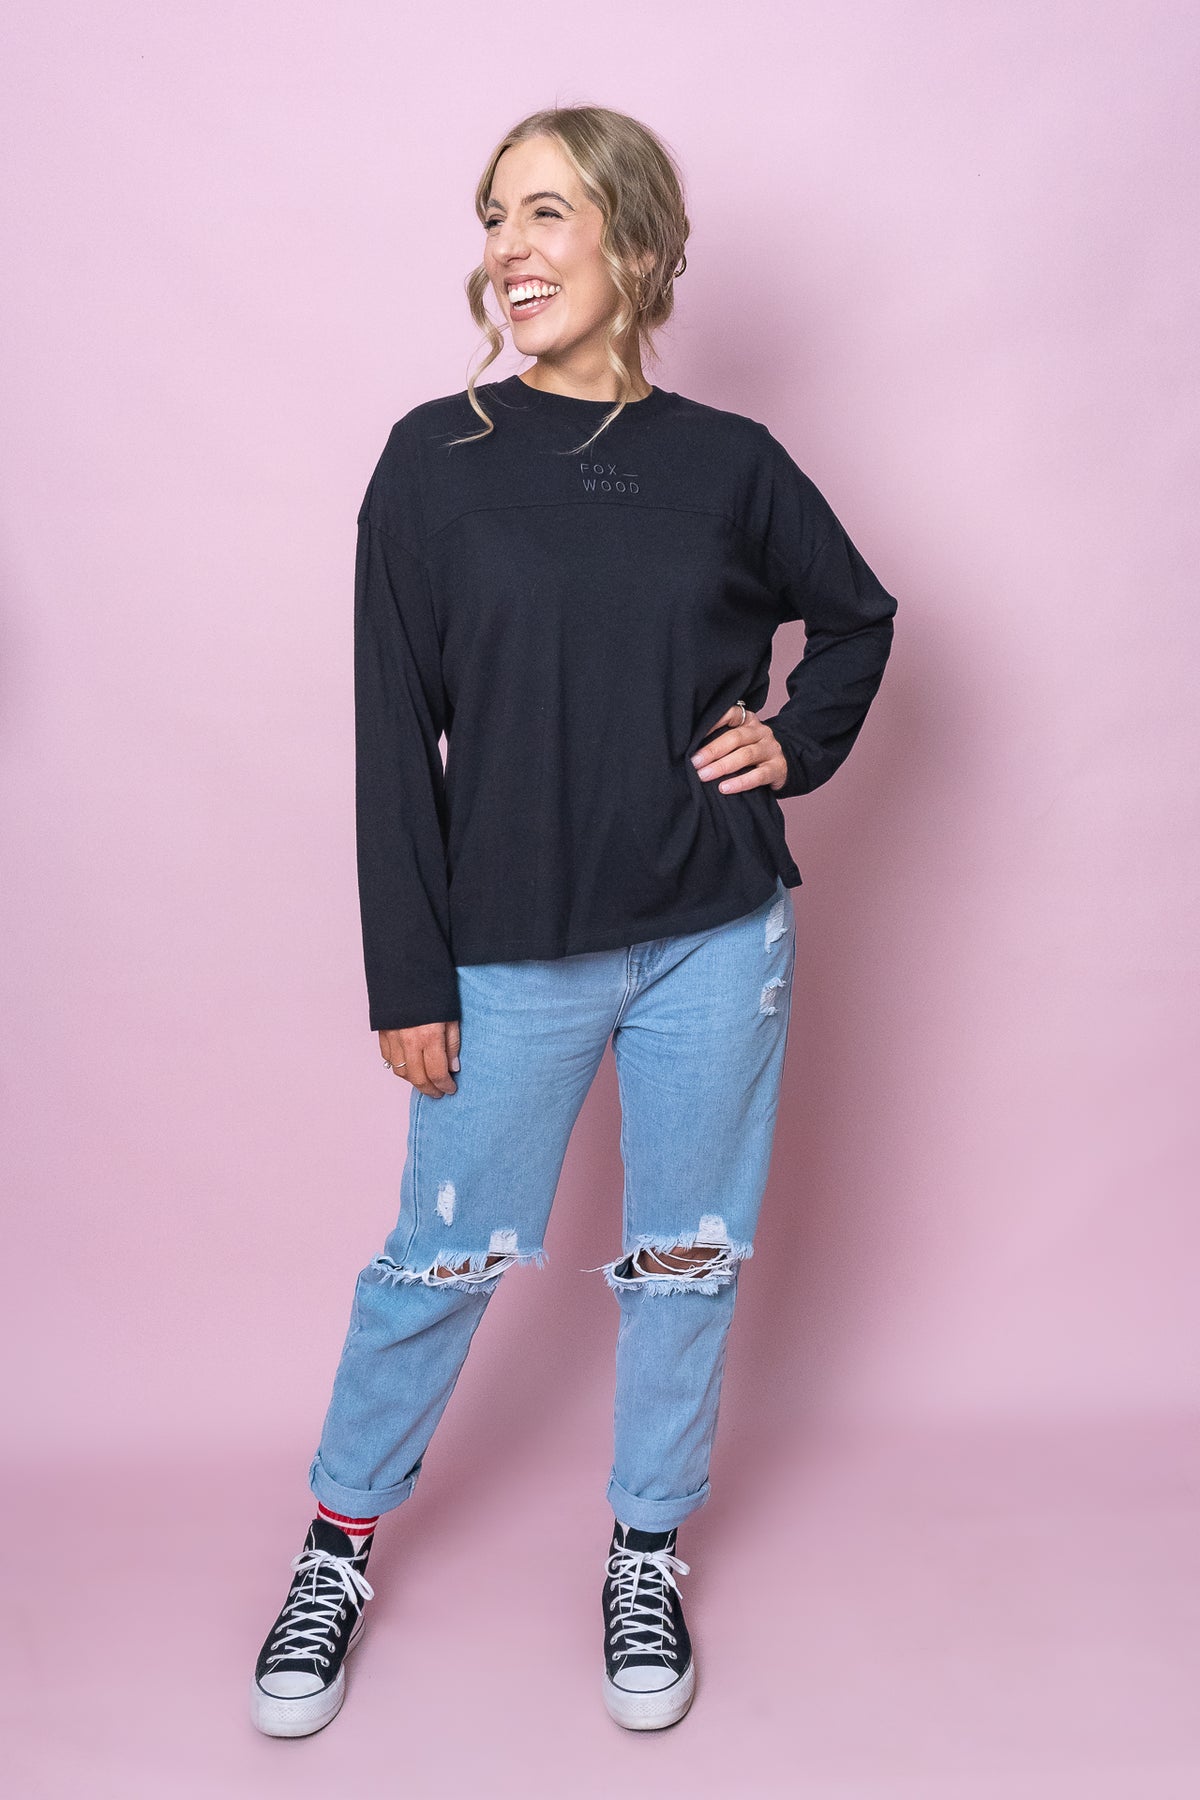 Hold Up Long Sleeve Top in Washed Black - Foxwood